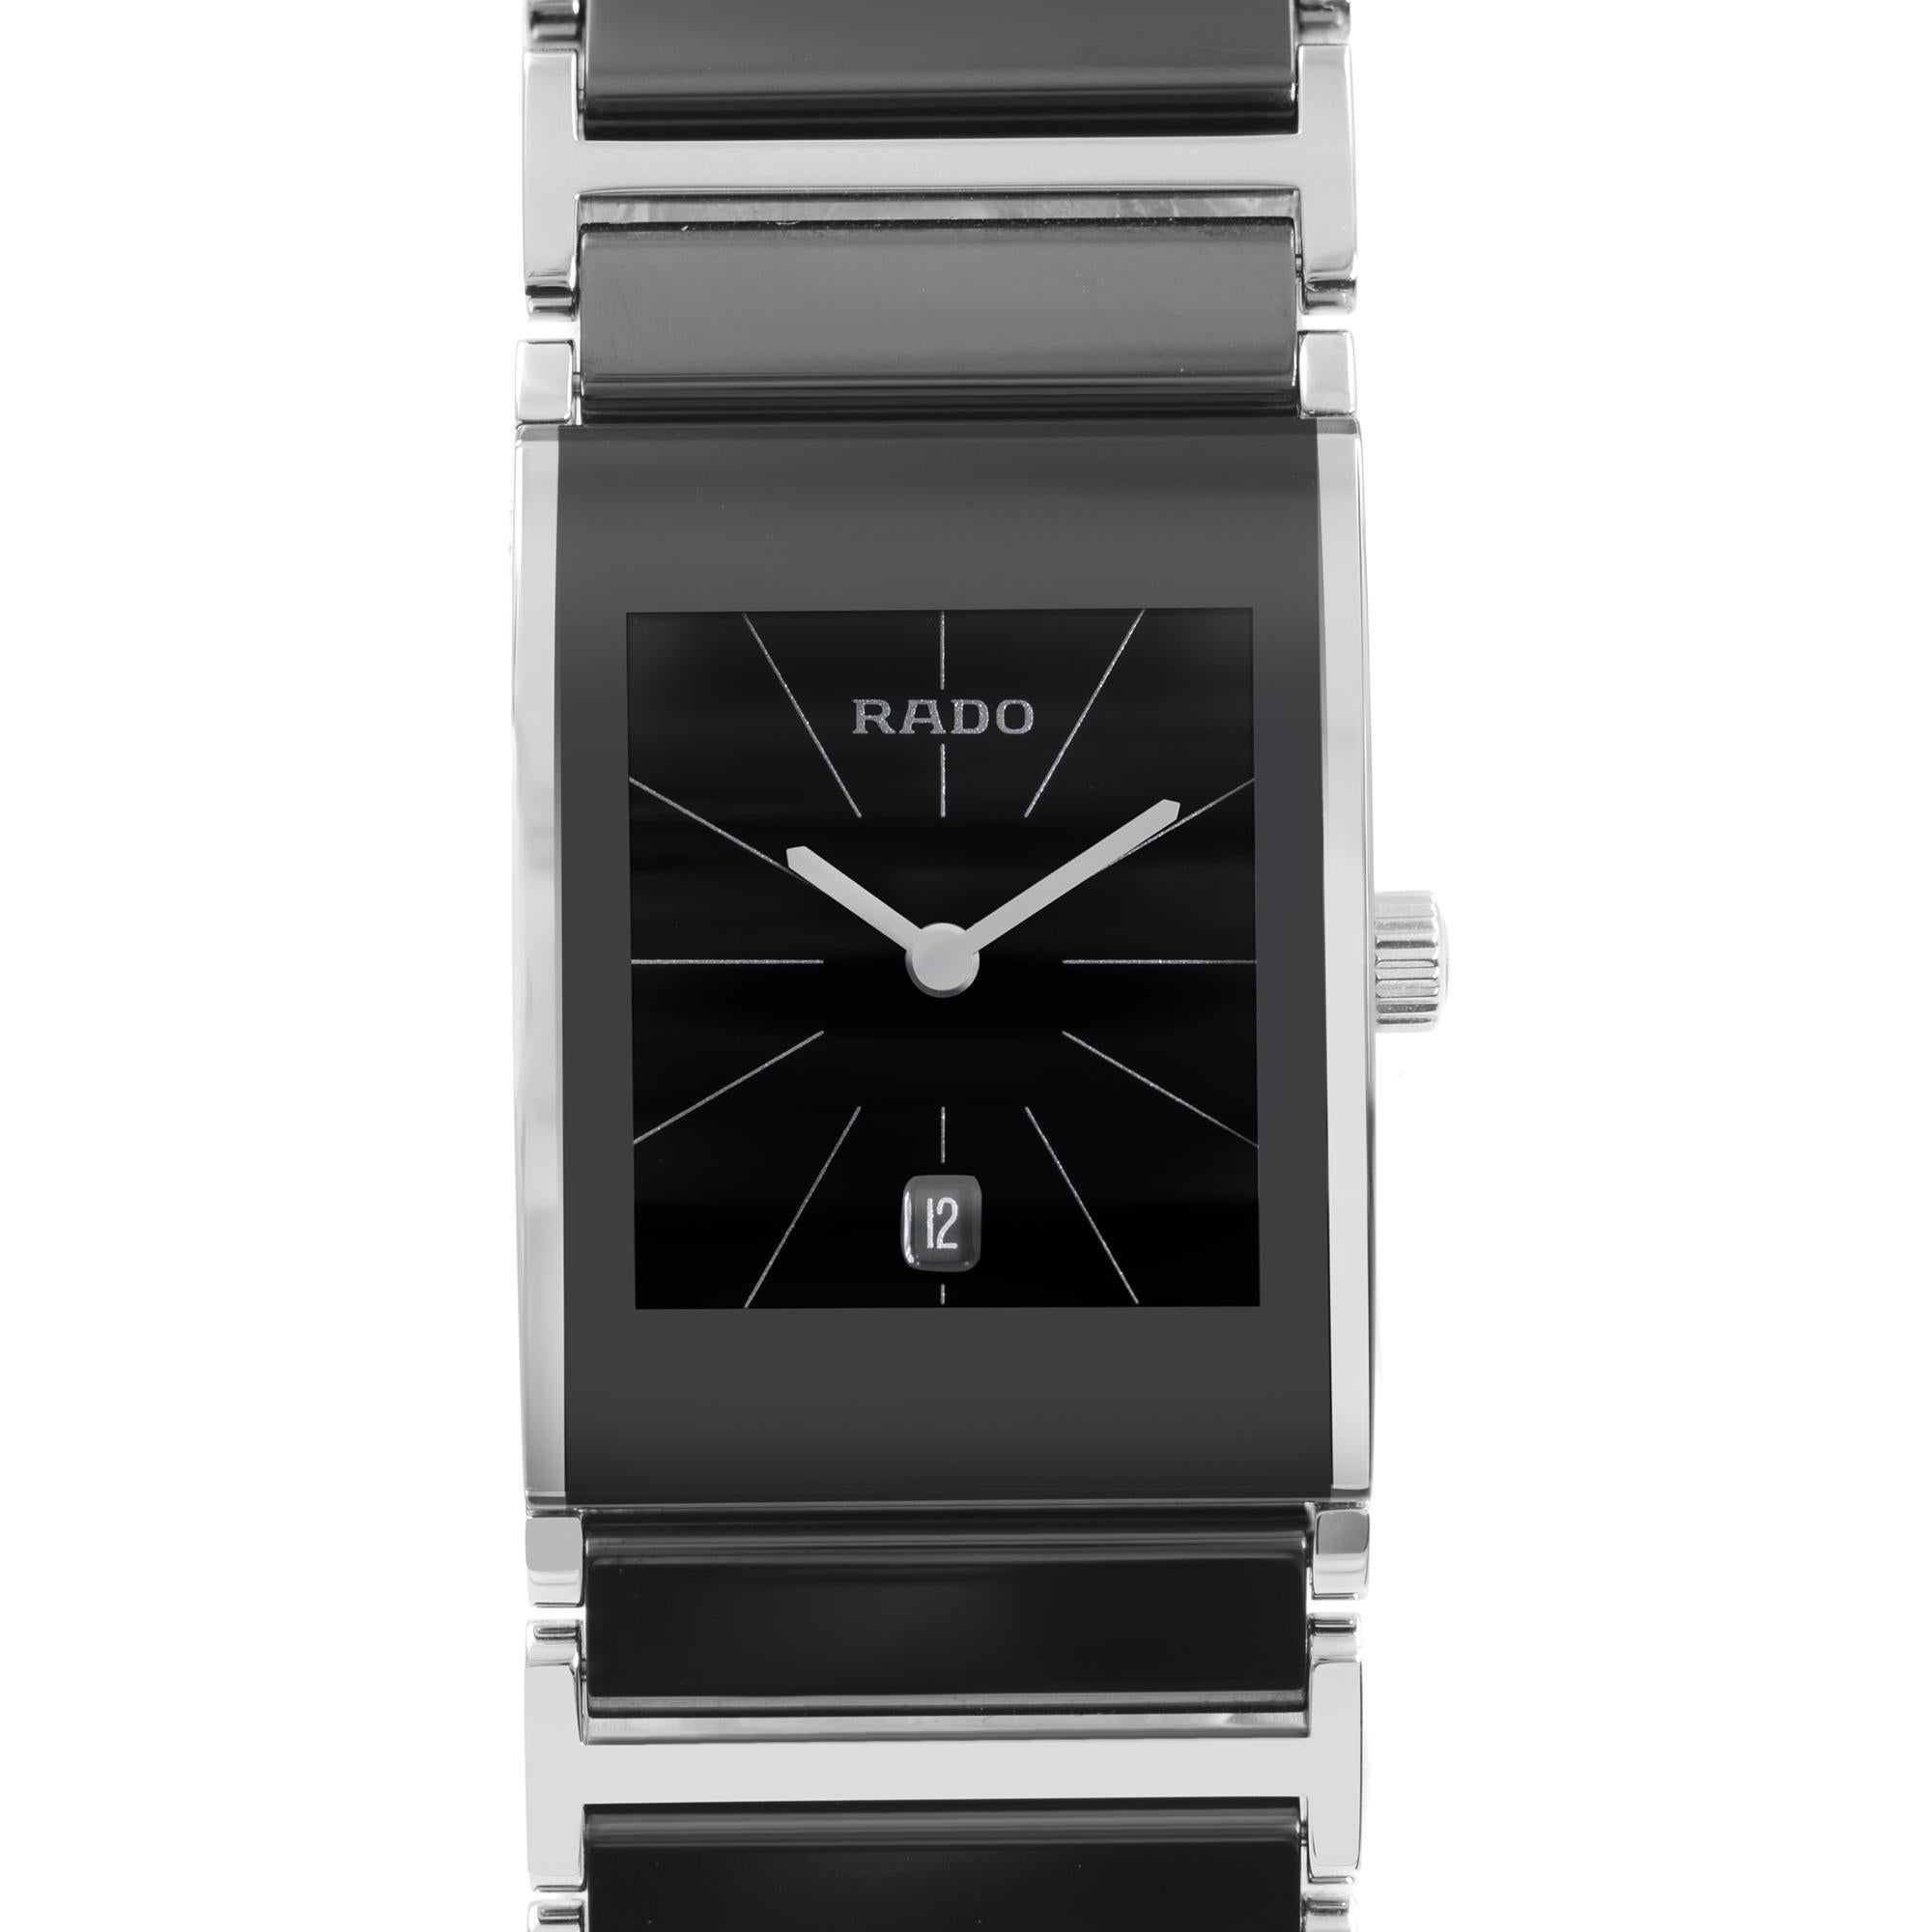 Unworn Rado Integral Quartz Ladies Watch R20785152. This Beautiful Ladies Timepiece Is Powered by a Quartz (Battery) Movement and Features: Silvers-Tone Stainless Steel Case With a Stainless Steel and Ceramic Bracelet. Black Dial with Silver-Tone